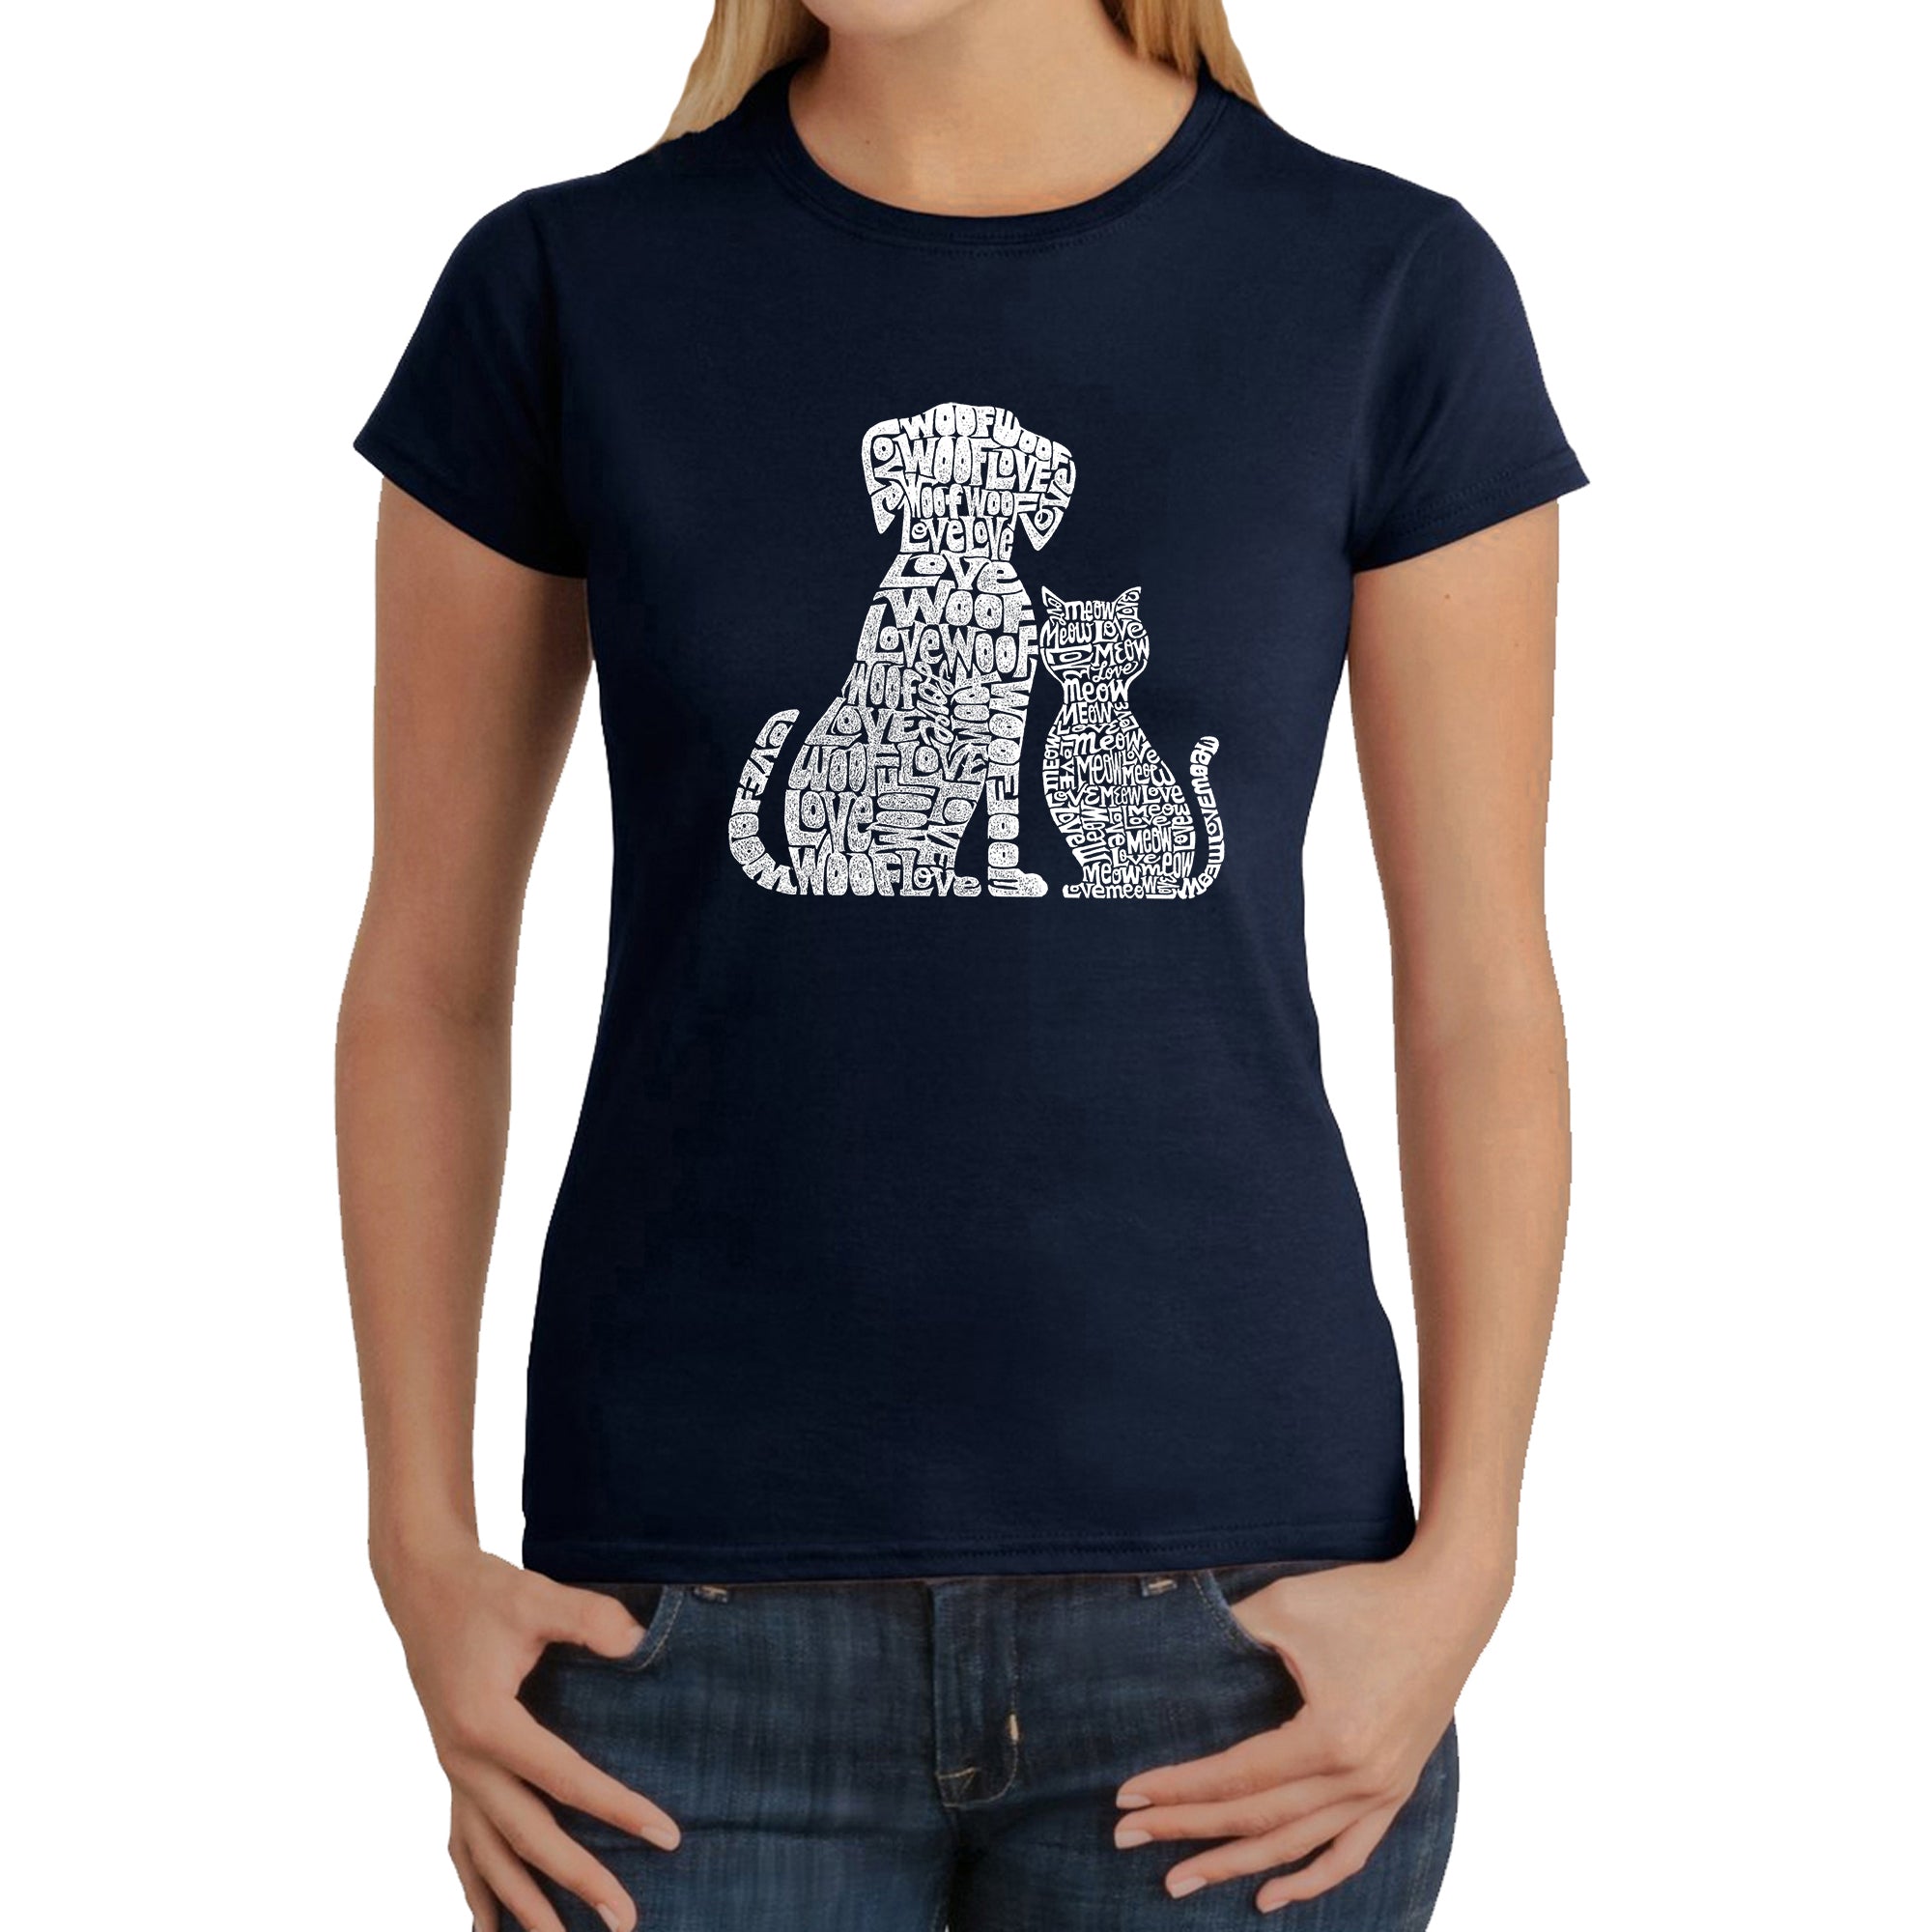 Dogs And Cats - Women's Word Art T-Shirt - Navy - XX-Large